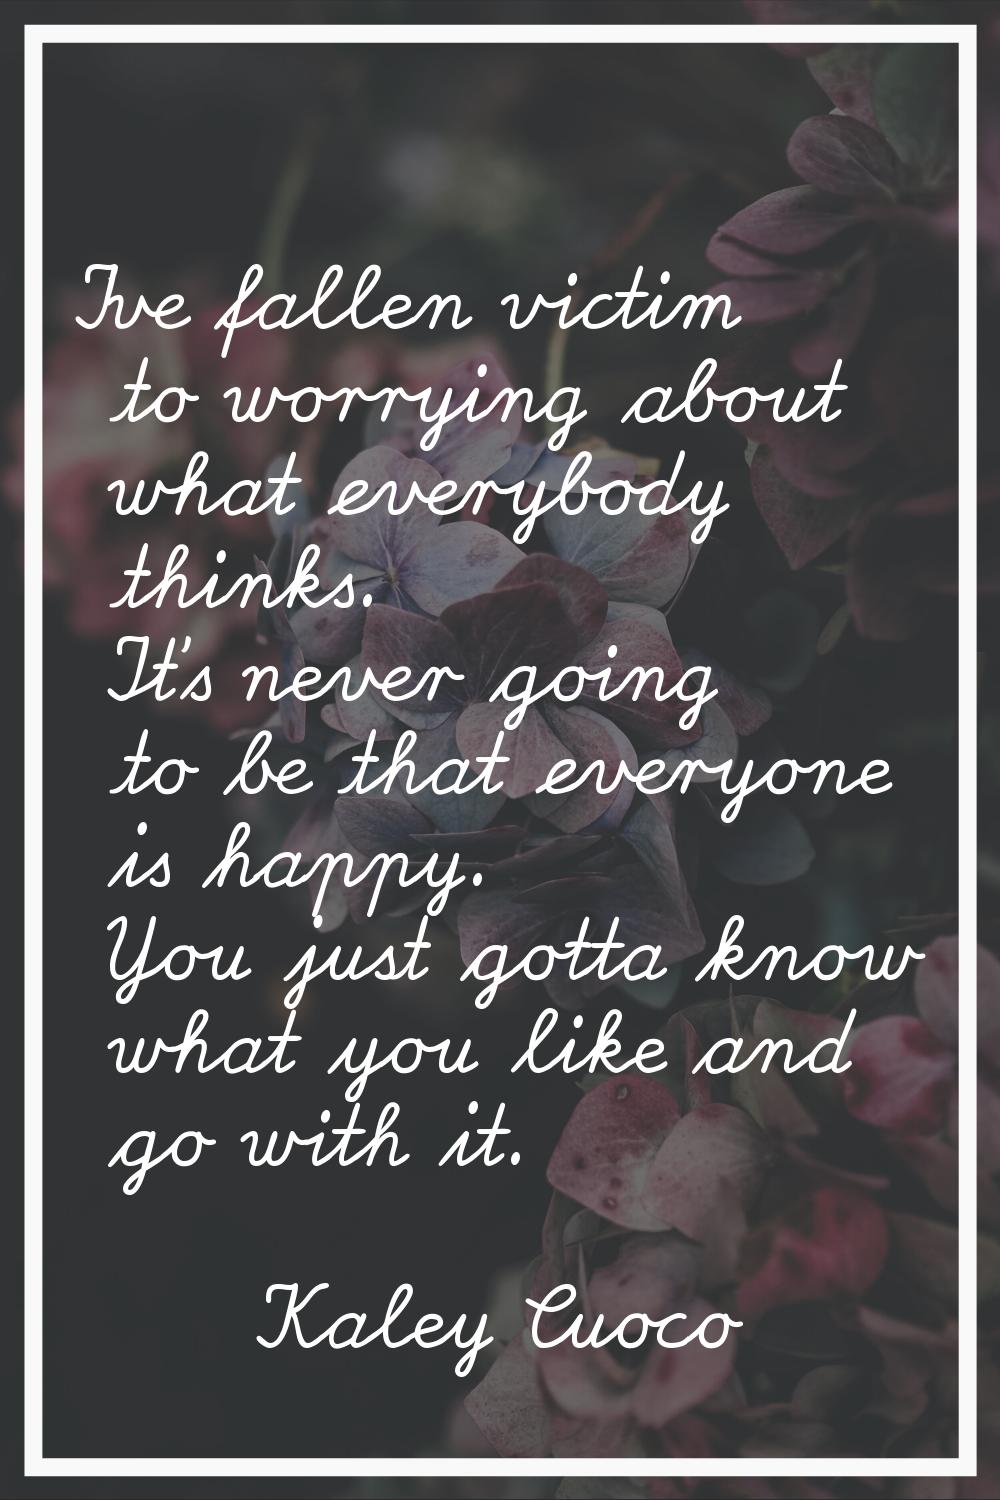 I've fallen victim to worrying about what everybody thinks. It's never going to be that everyone is